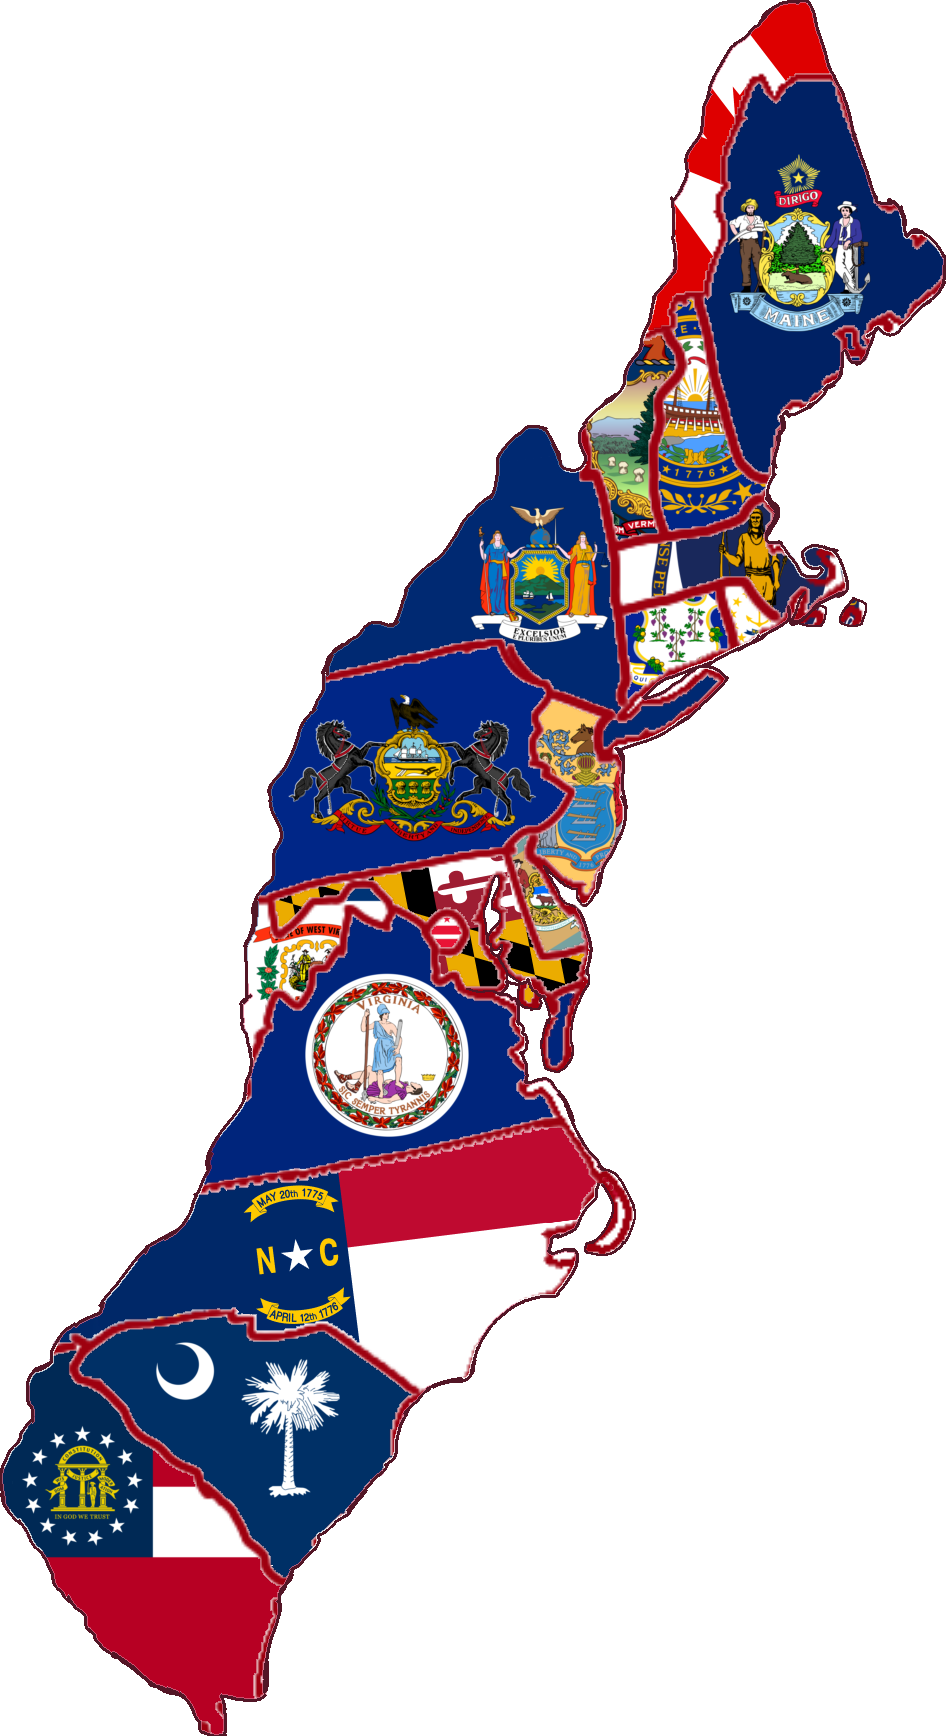 Flag map of the 13 states of america states versio by rssc2021 on ...